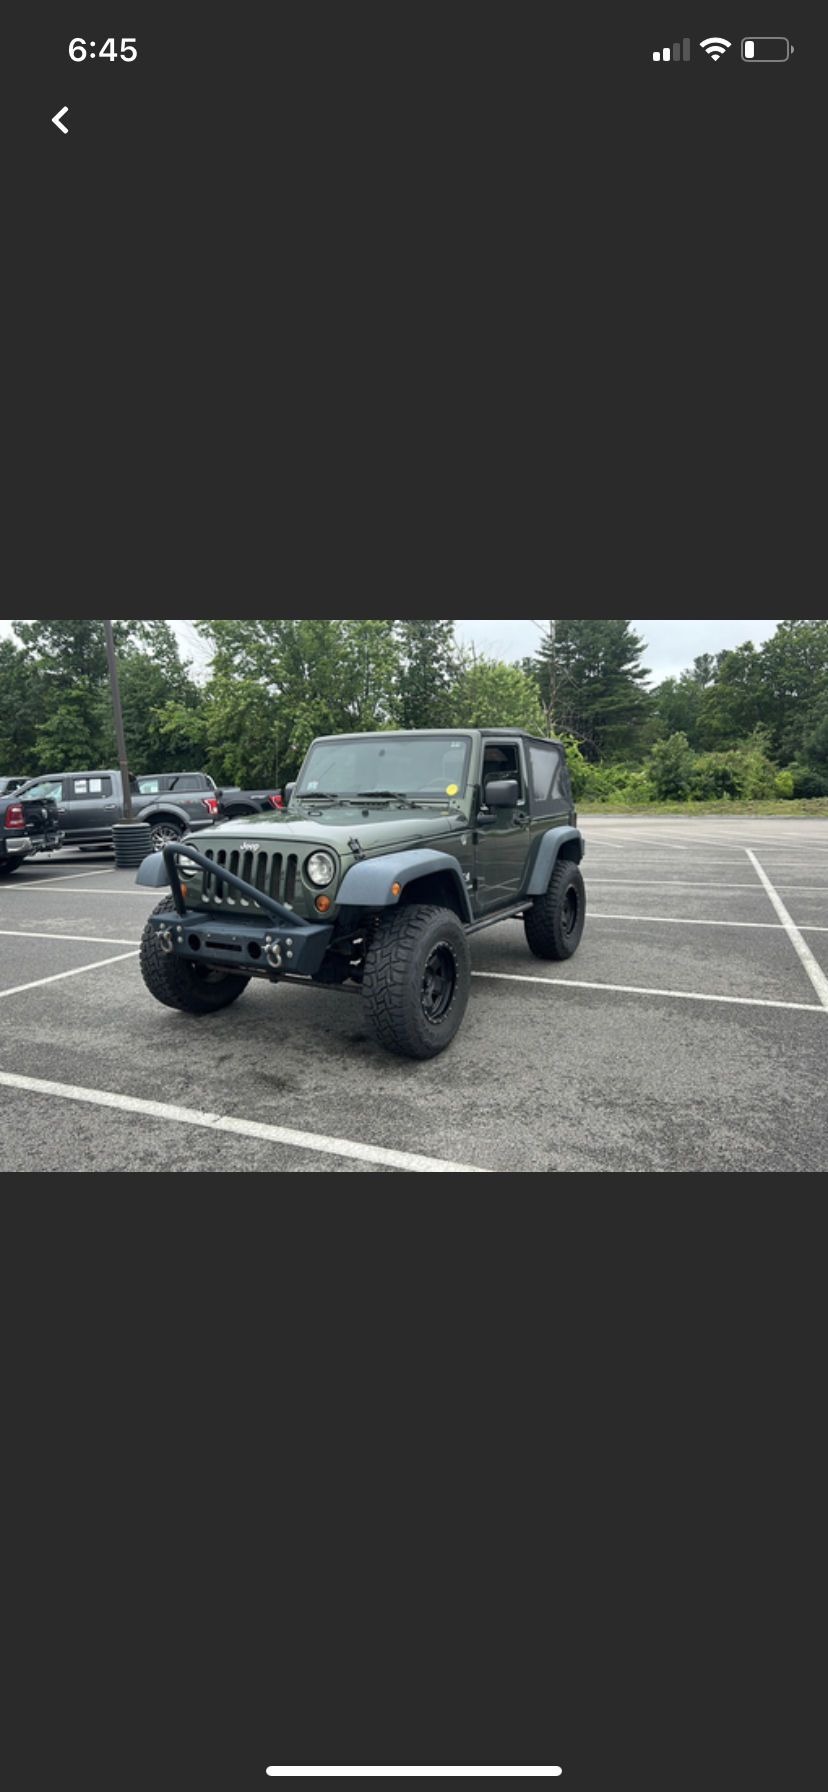 2009 Jeep Wrangler Lifted with Extras!! 